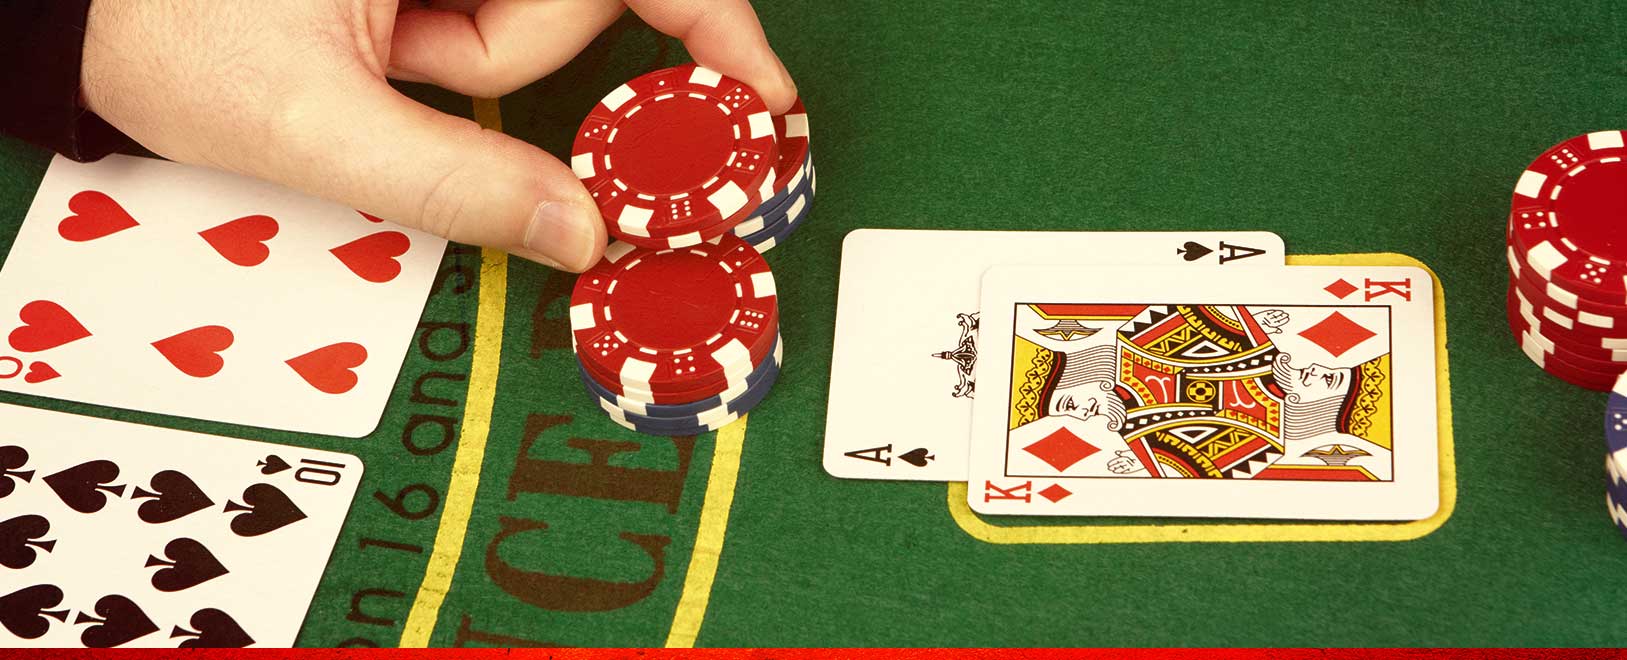 Blackjack Strategy: How to Double Down